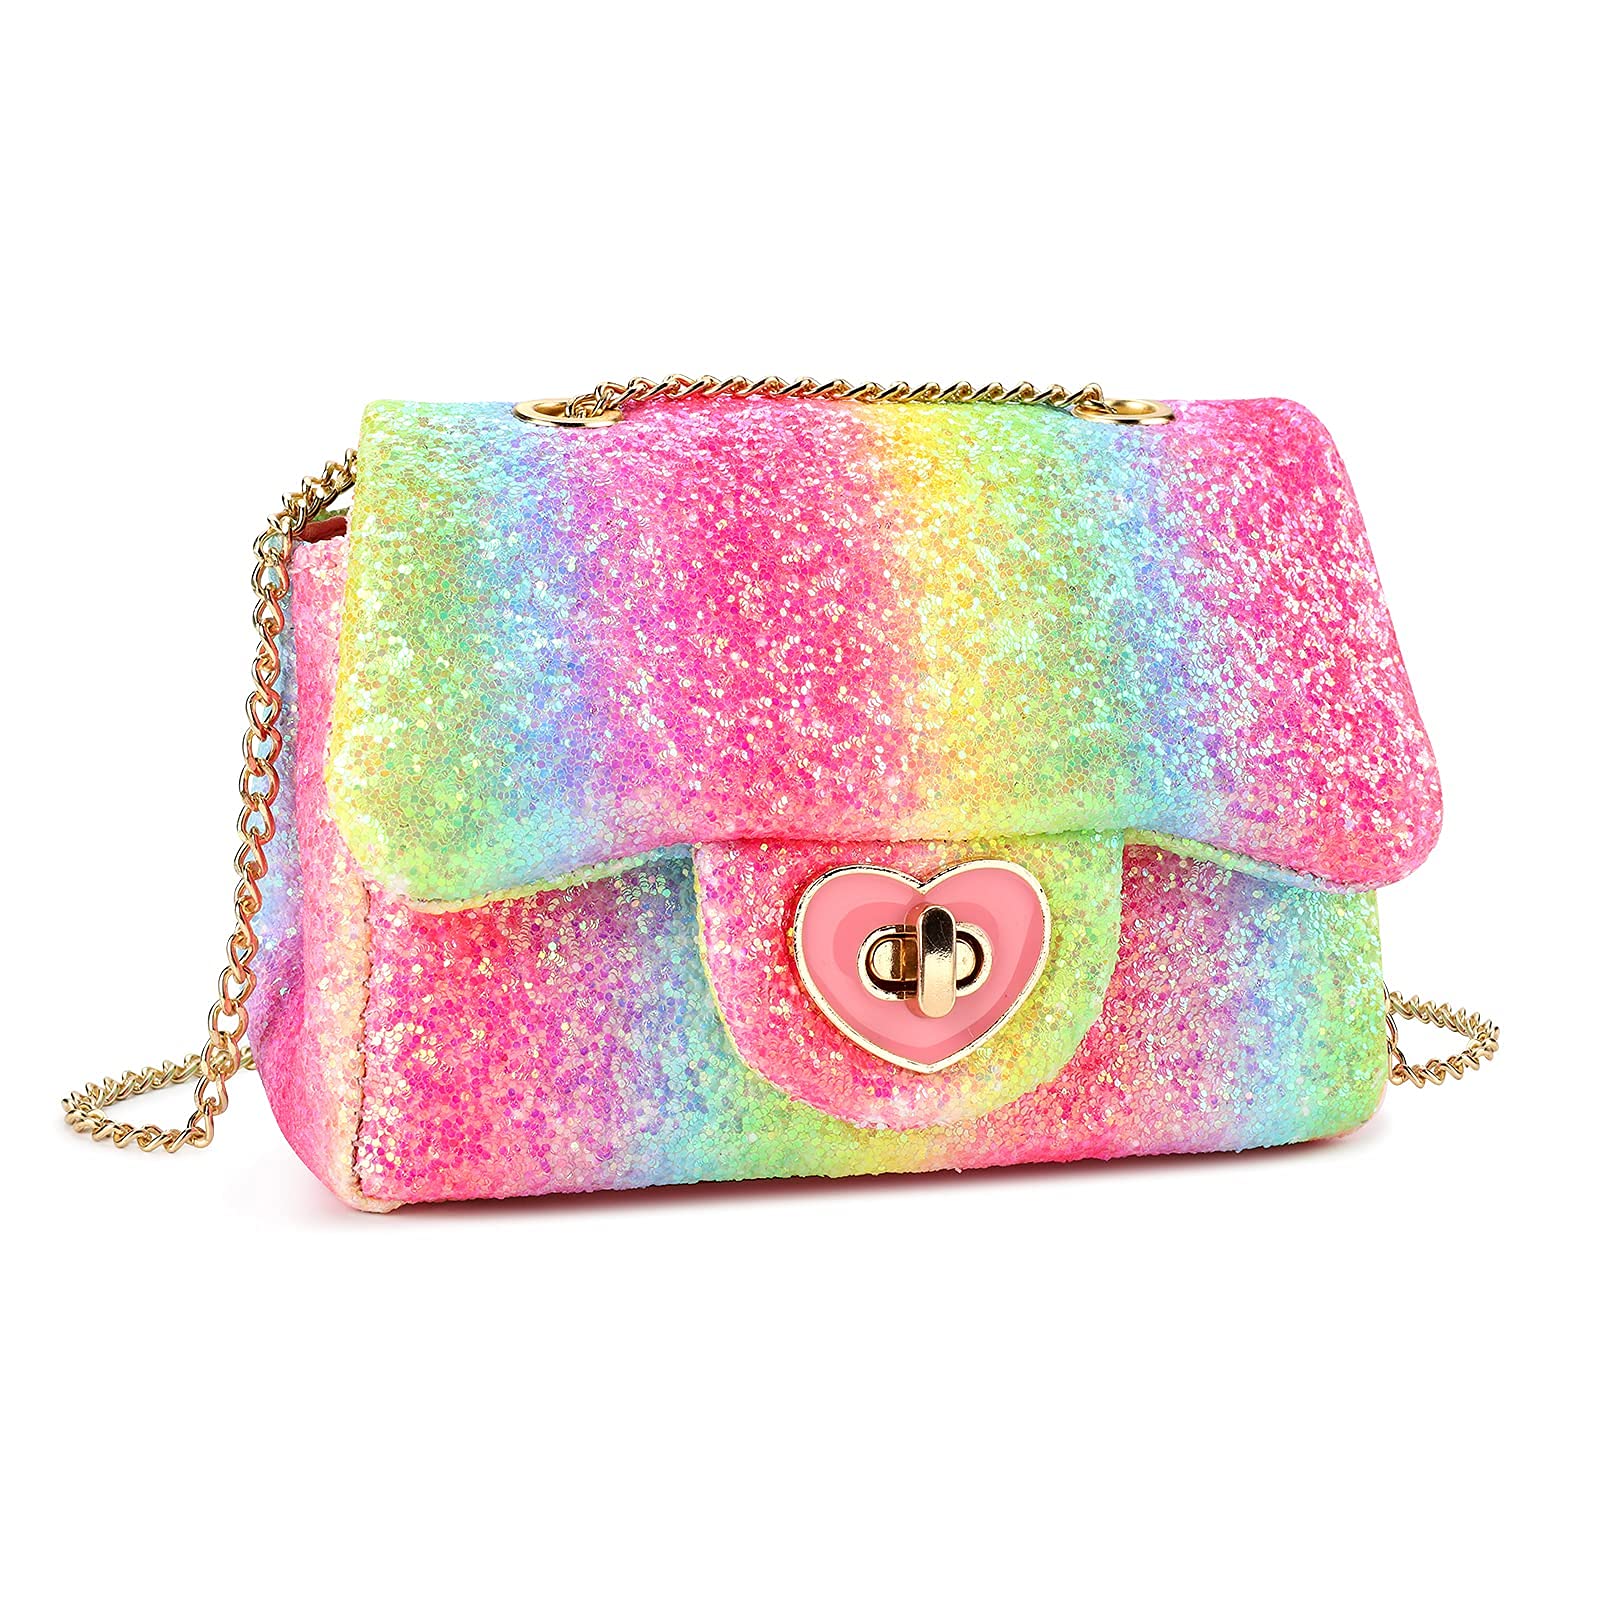 Accessories Report: Spring 2015 Bag Trends | Bags, Bag trends, Spring bags